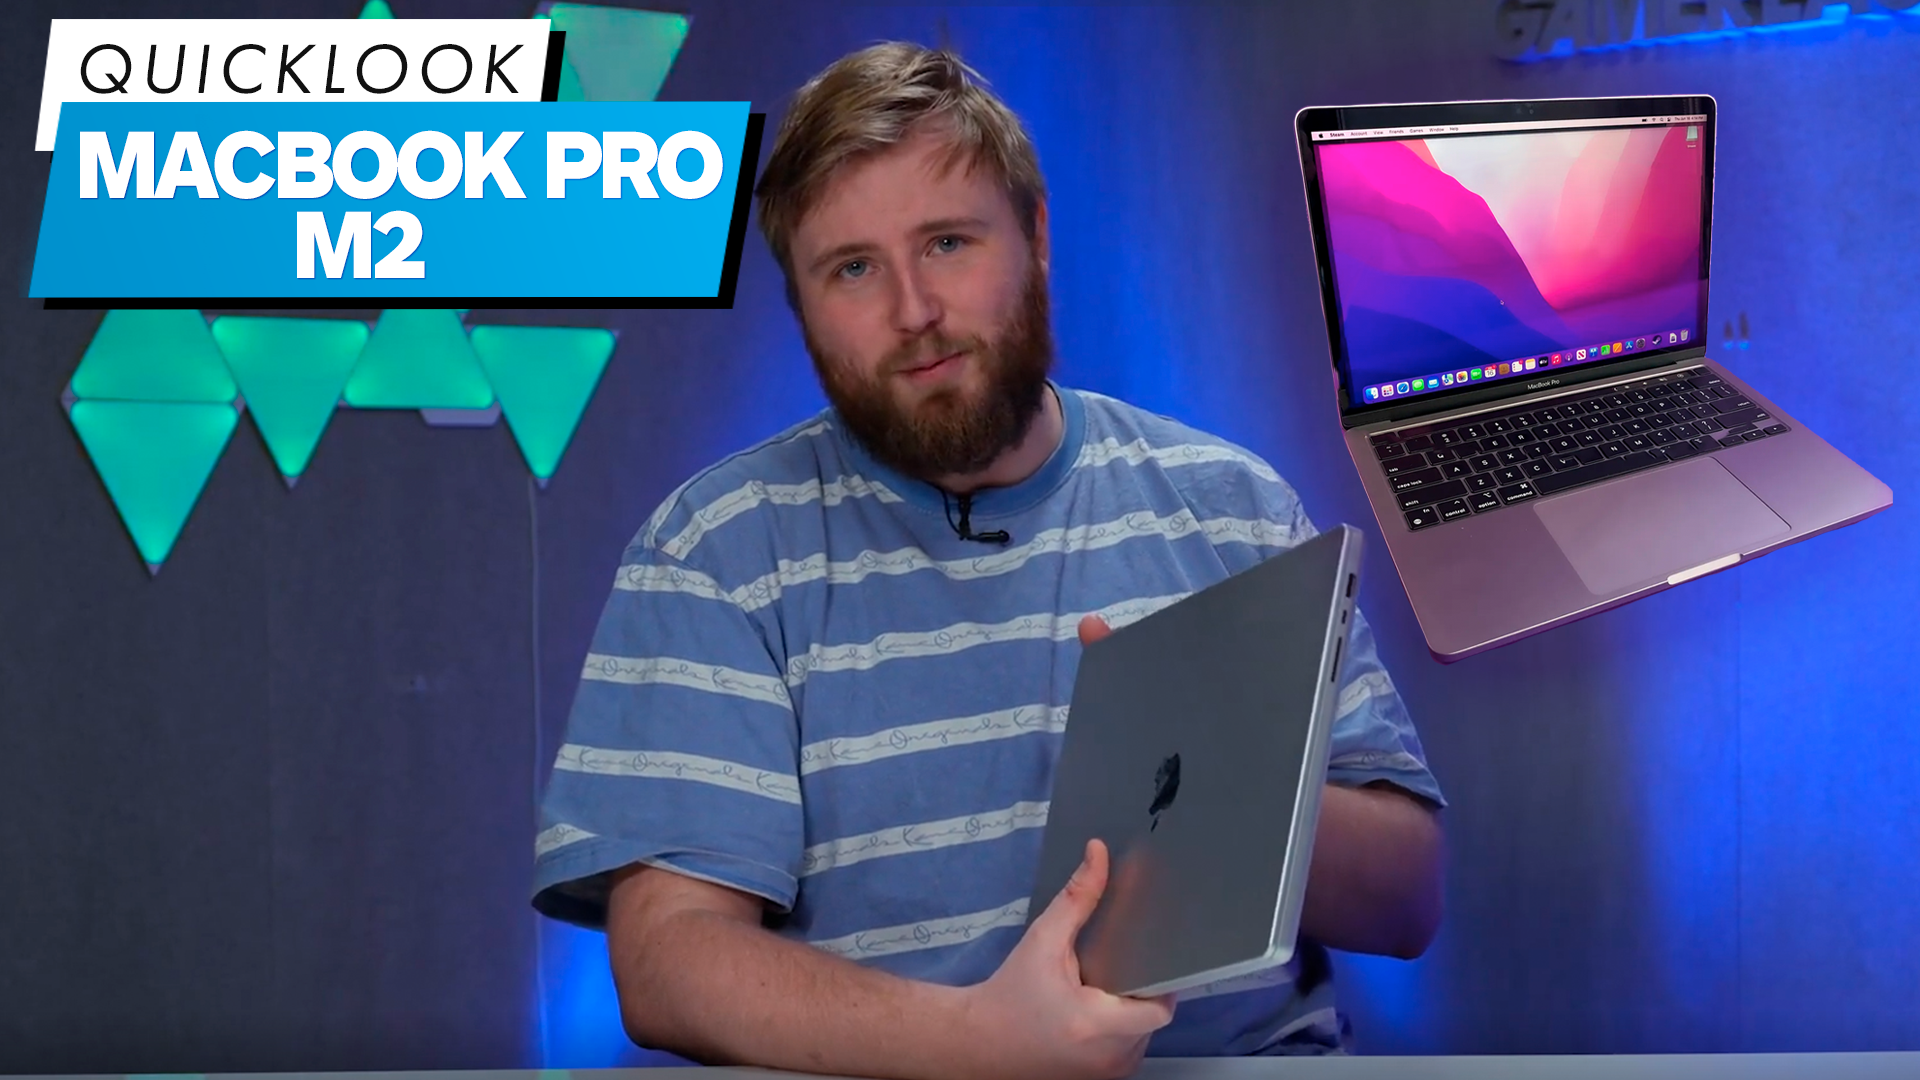 We’ve been playing around with the M2 version of the MacBook Pro –